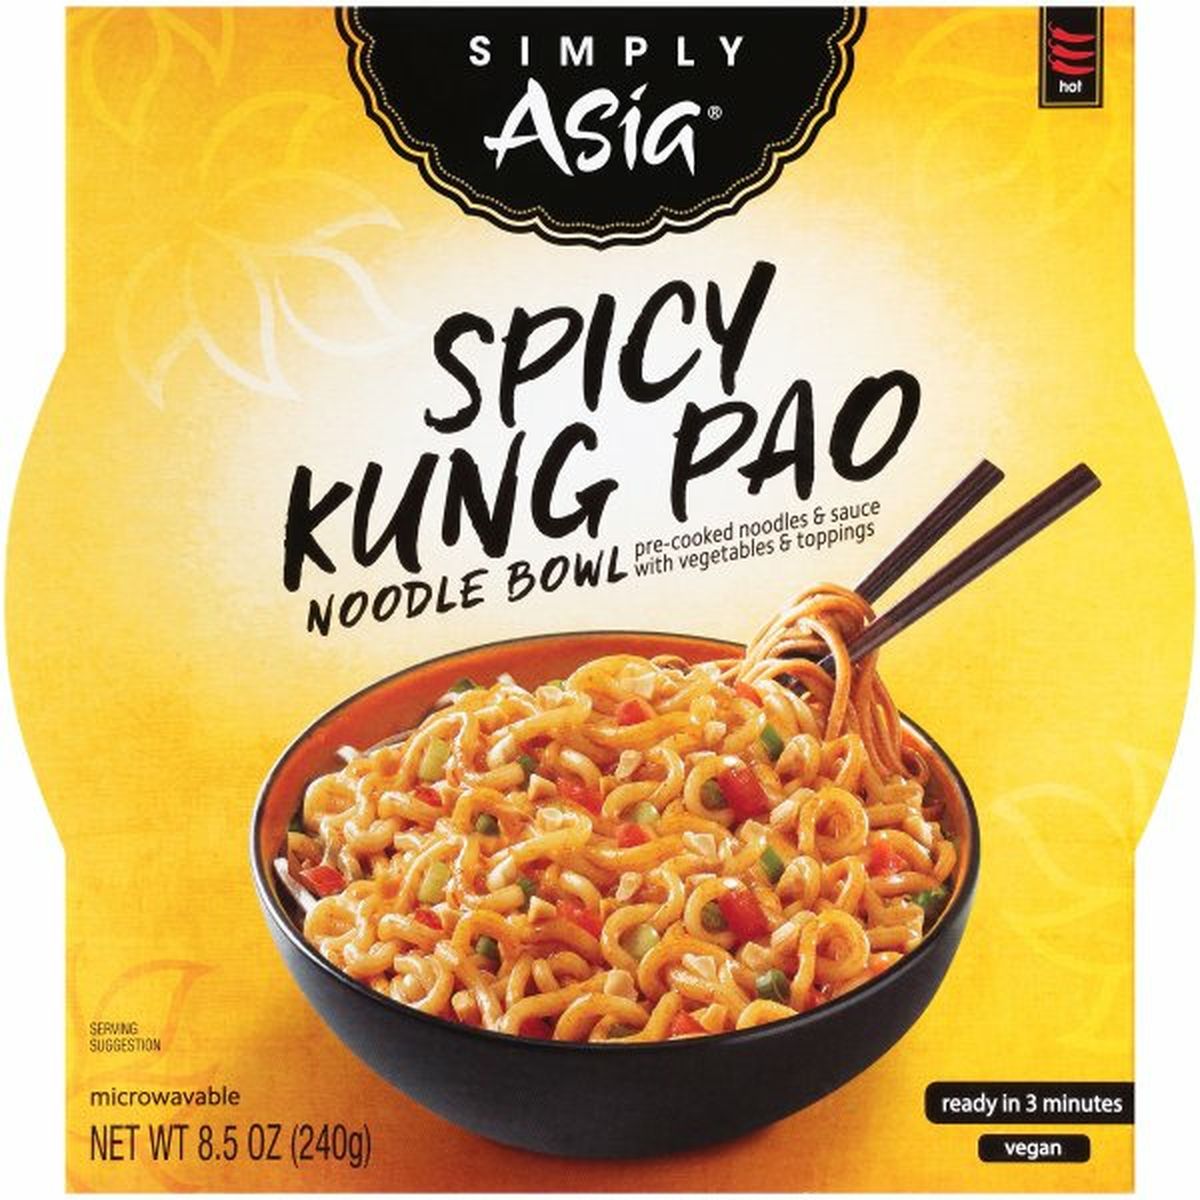 Calories in Simply Asias  Spicy Kung Pao Noodle Bowl